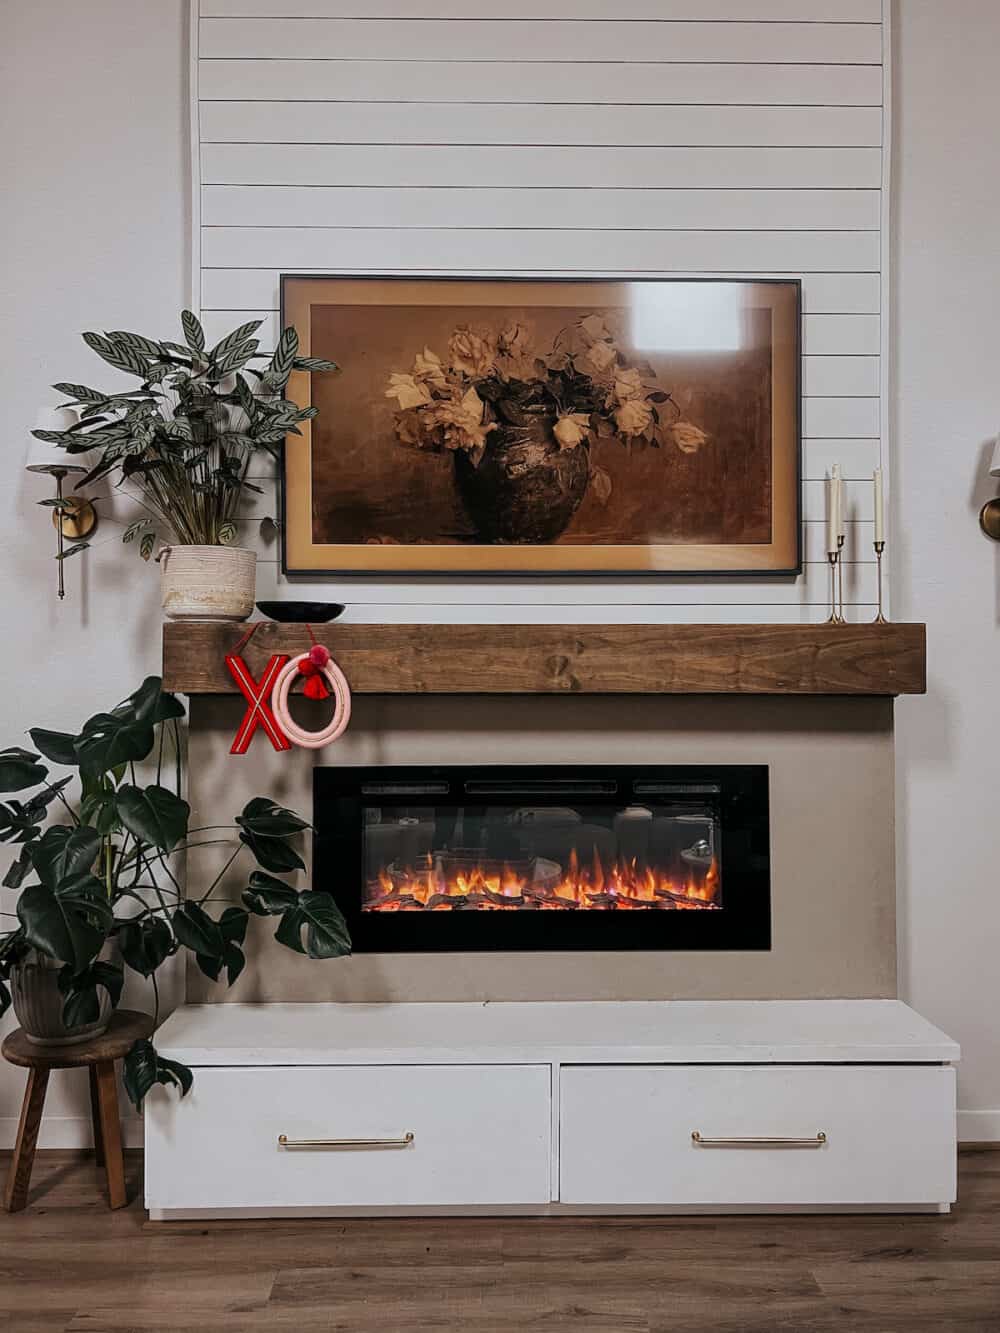 Fireplace decorated for Valentine's day 